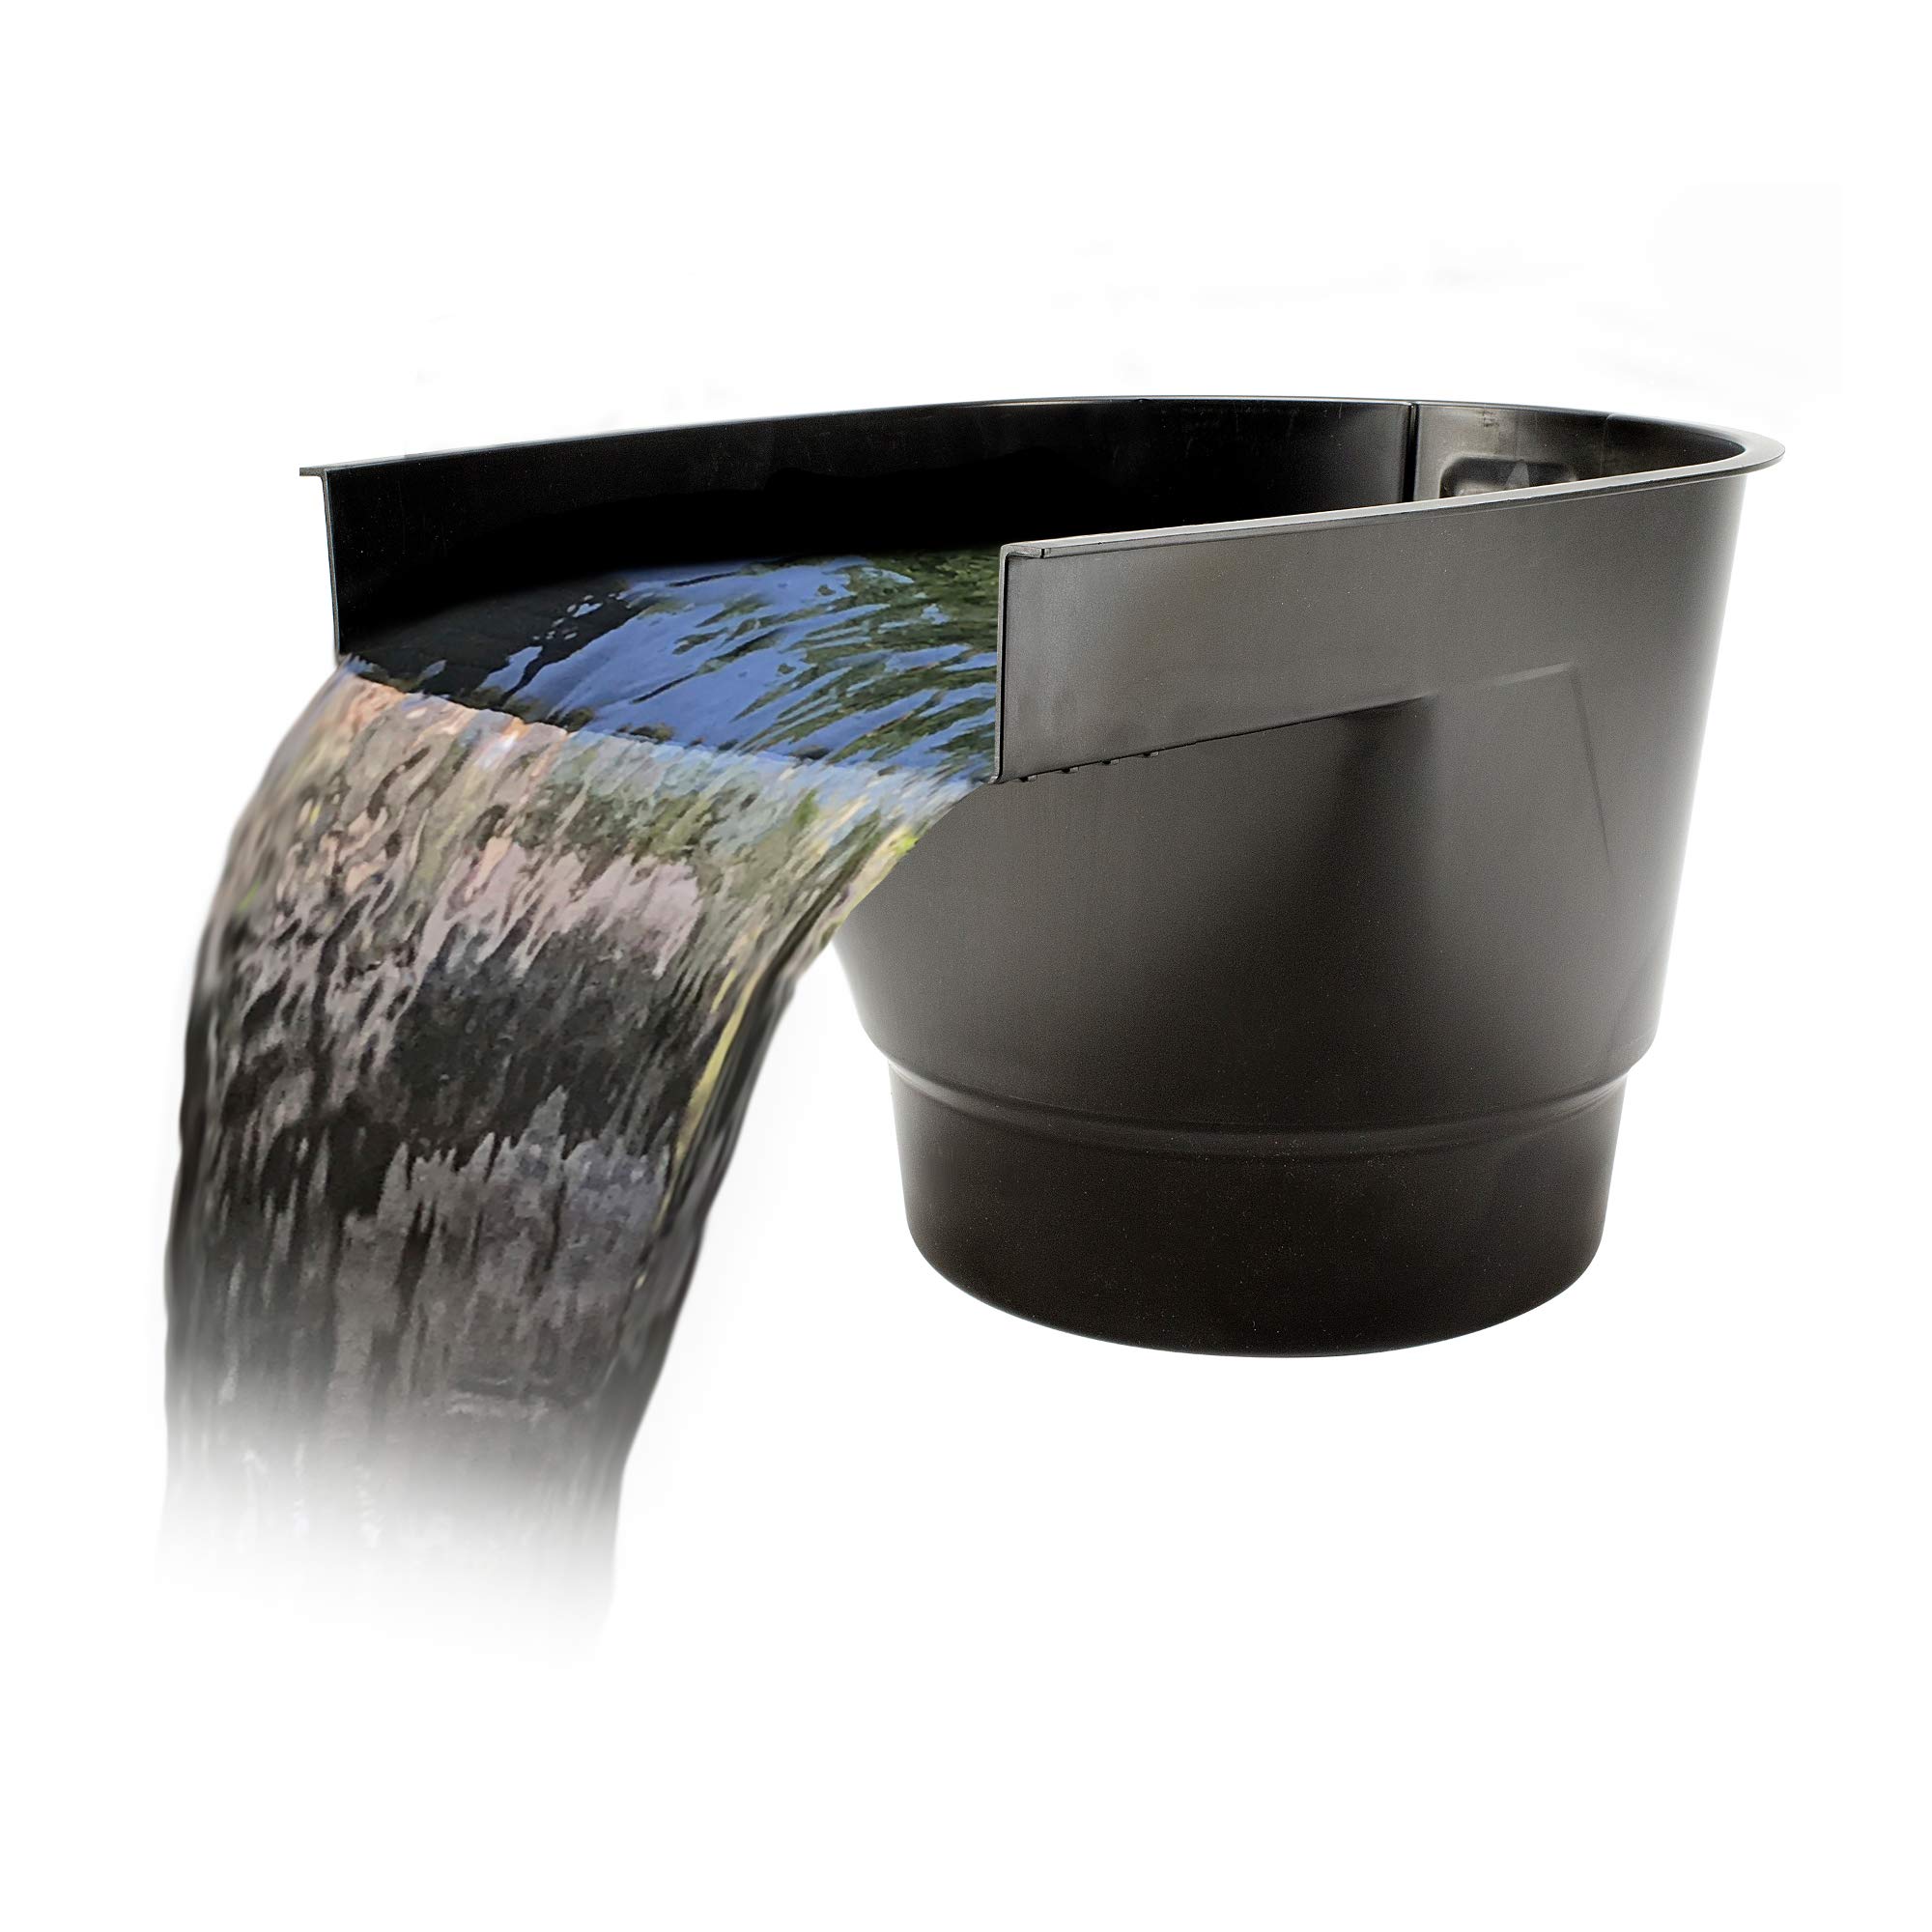 Aquascape Pond Filter and Waterfall Spillway, Efficient Mechanical and Biological Filtration, Compact | 77020,Black